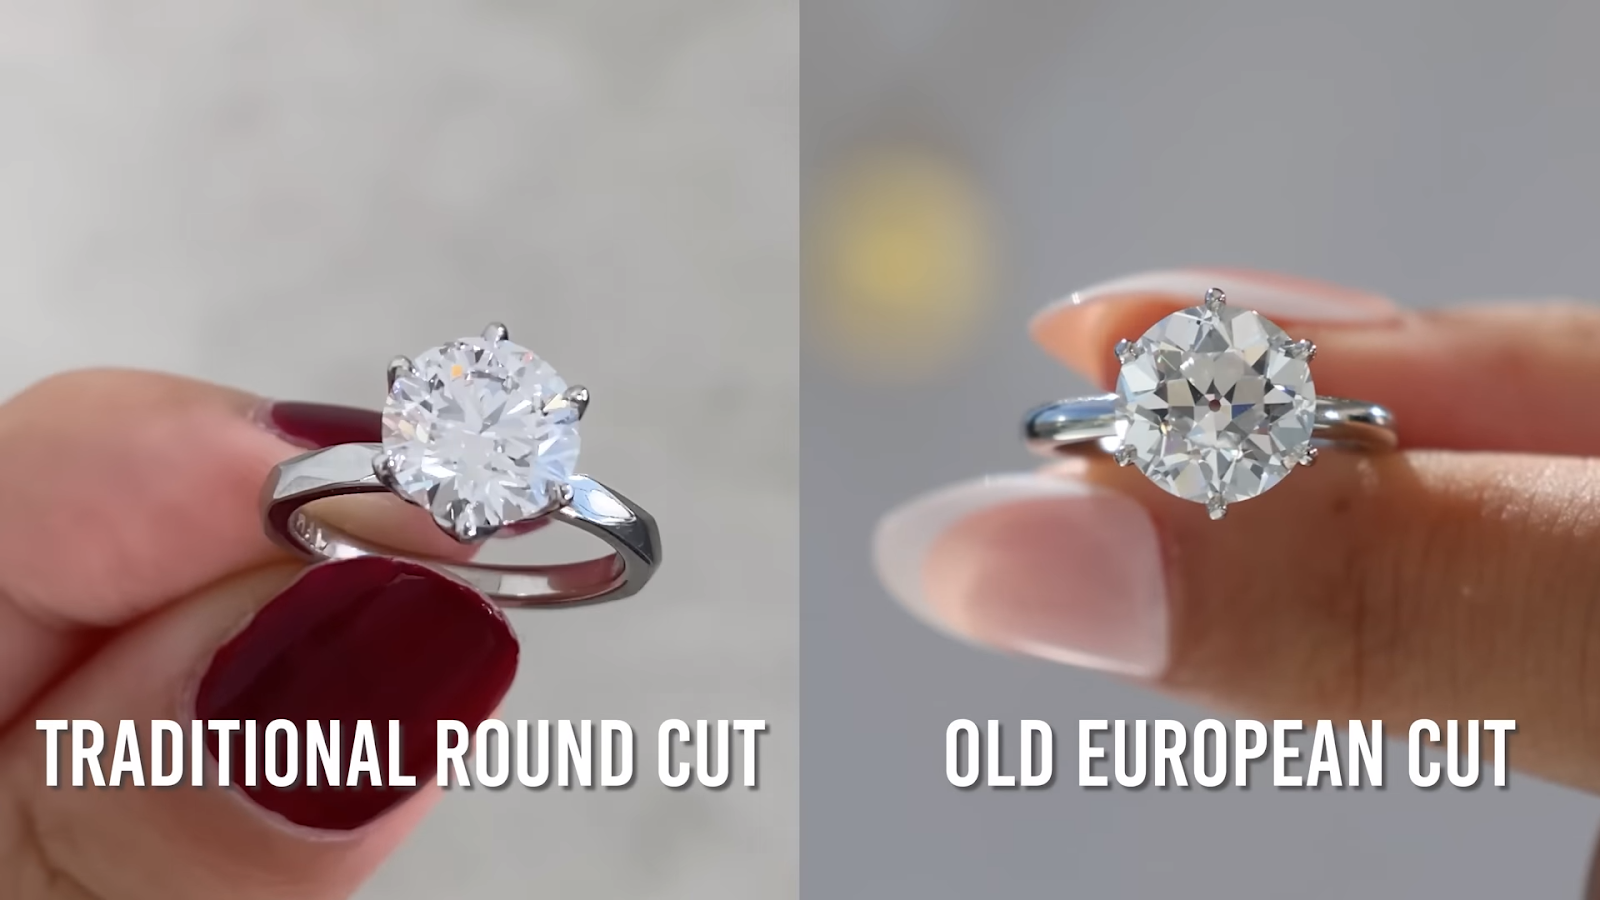 Difference Between Old European Cut & Round Cut Diamond